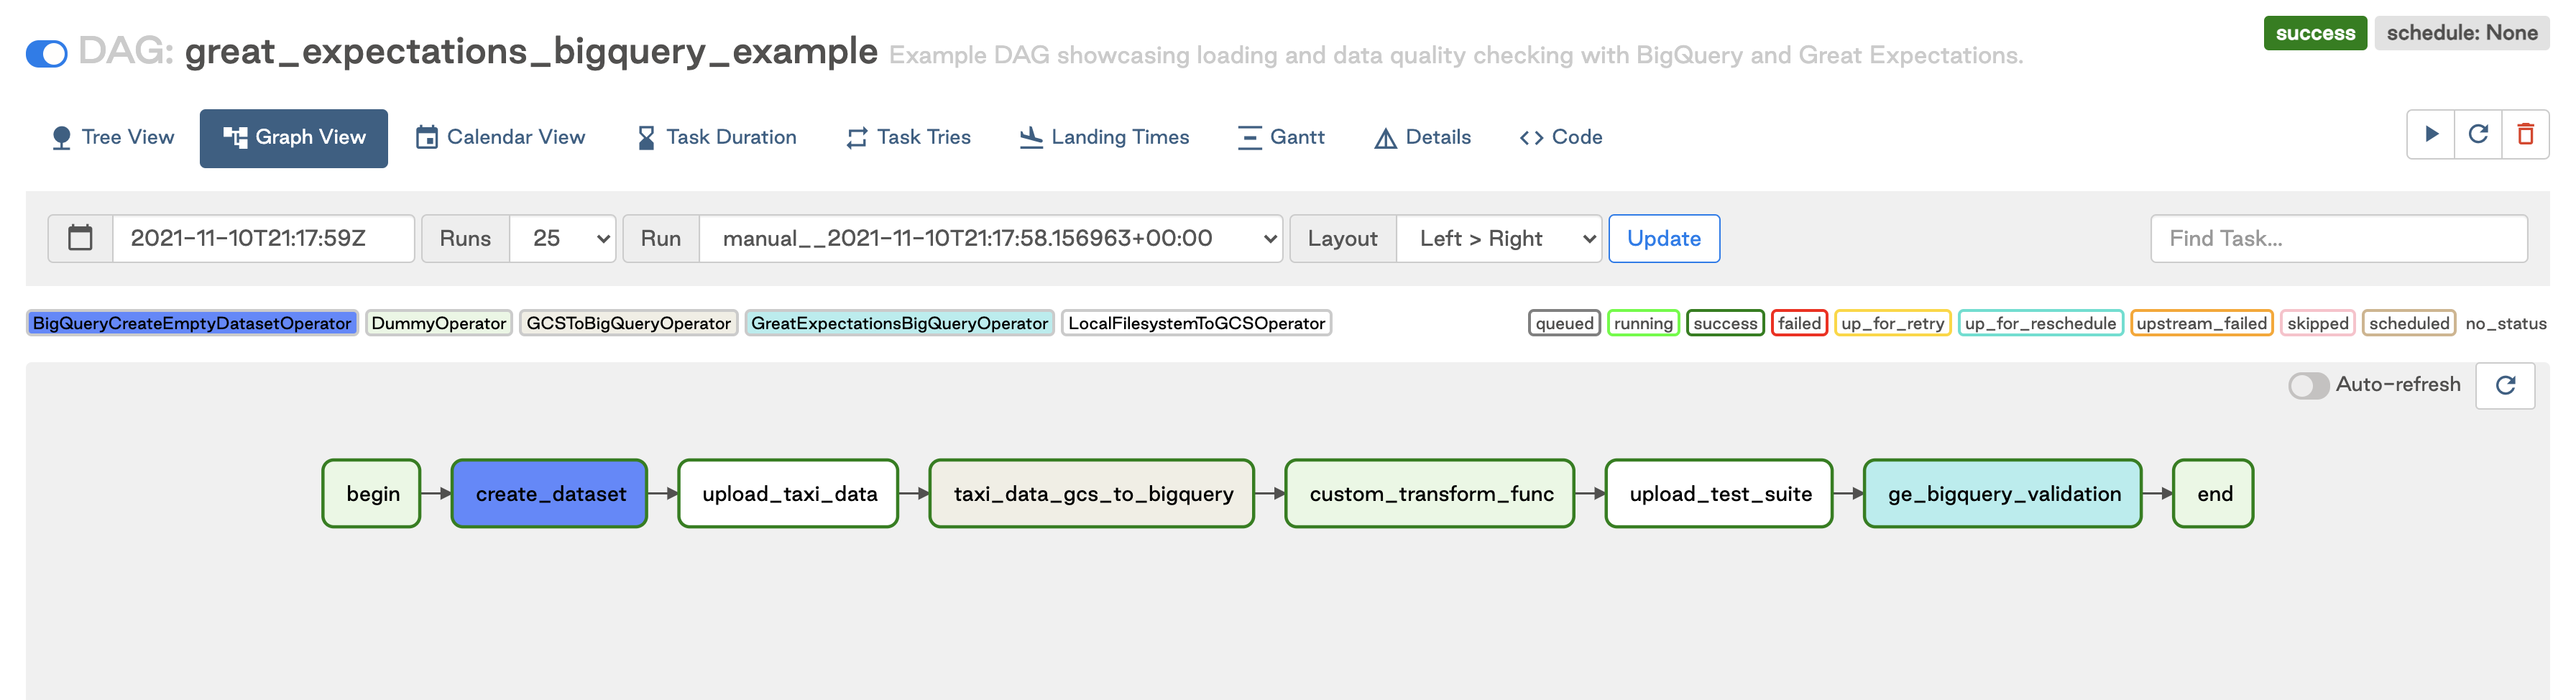 Example DAG With Data Quality